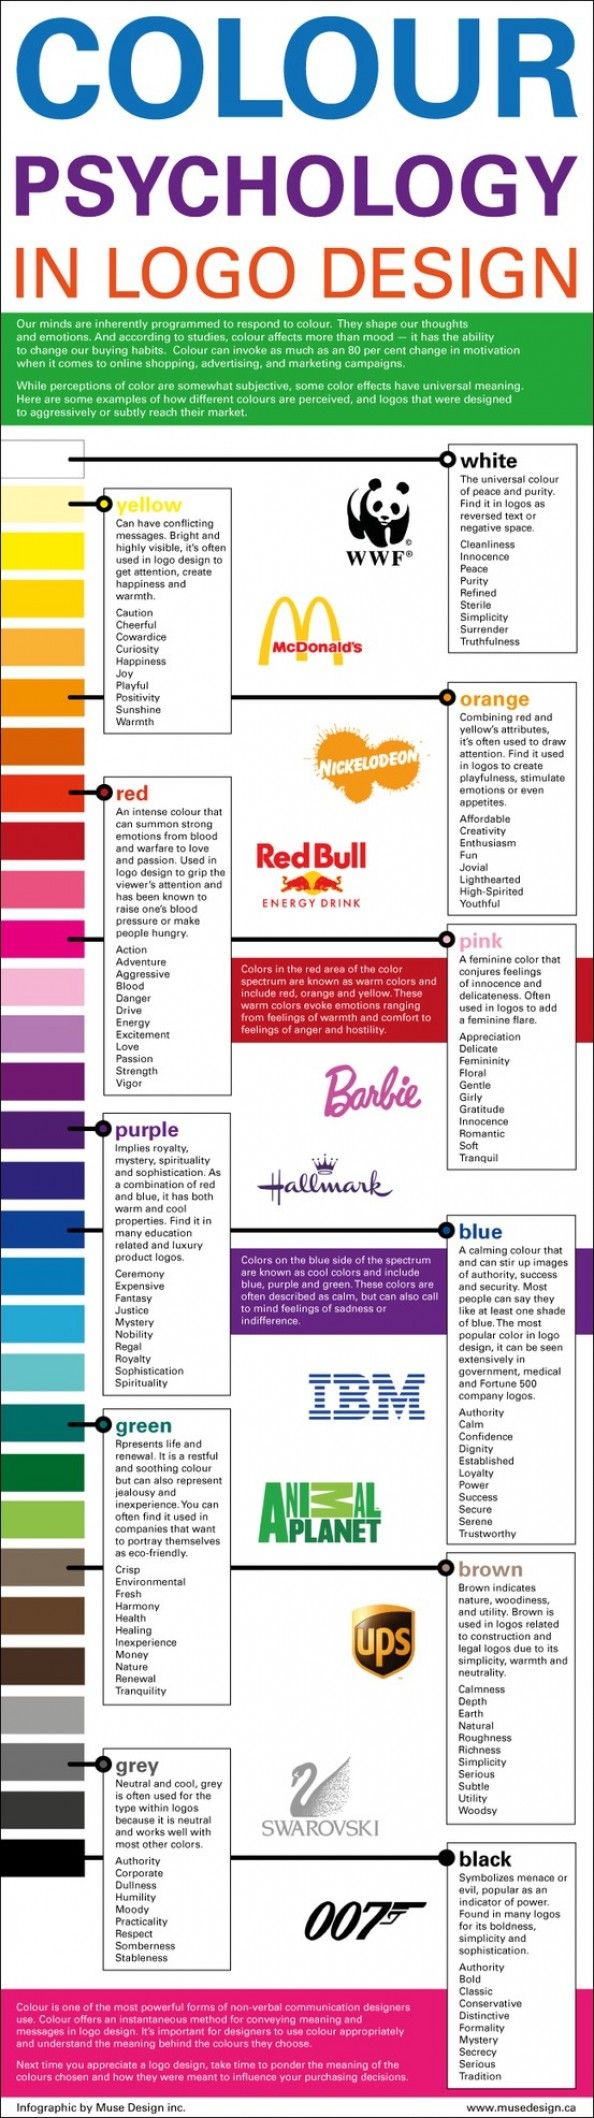 1546157093_282_Psychology-Infographic-Color-Psychology-in-Logo-Design-Infographic Psychology Infographic : #Color Psychology in #Logo #Design - #Infographic